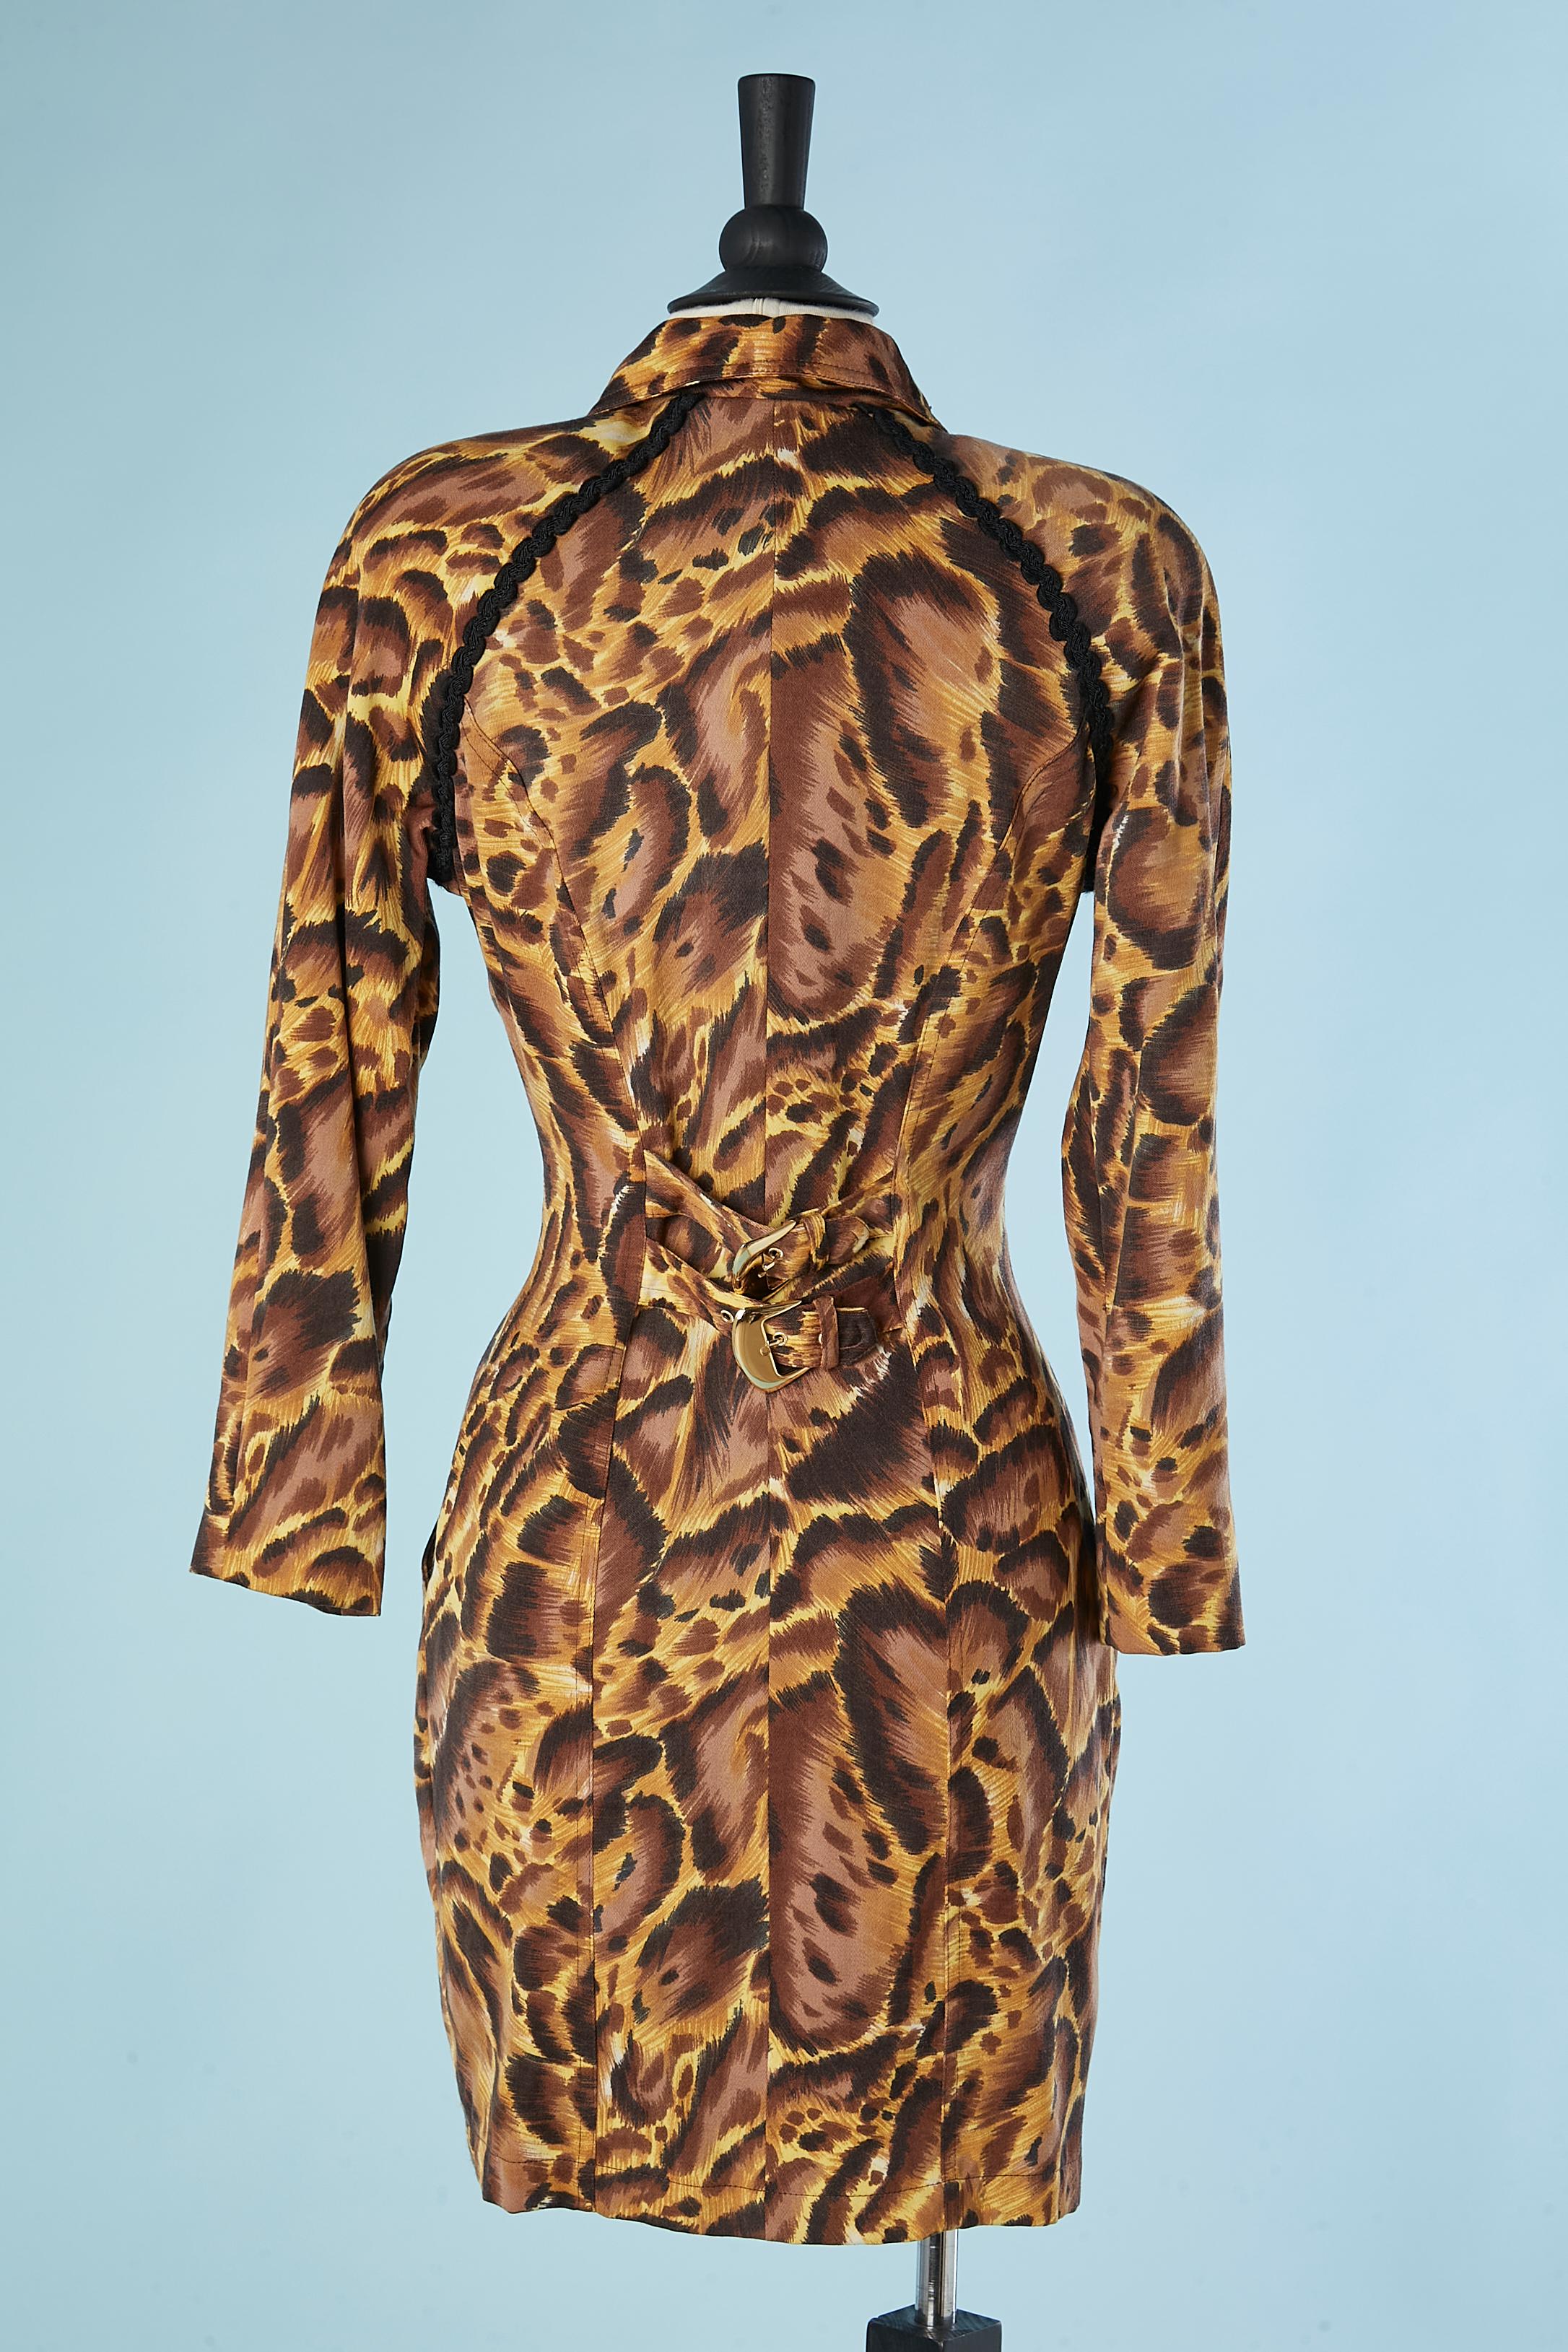 Leopard printed dress with gold button and buckles Versus Gianni Versace  2